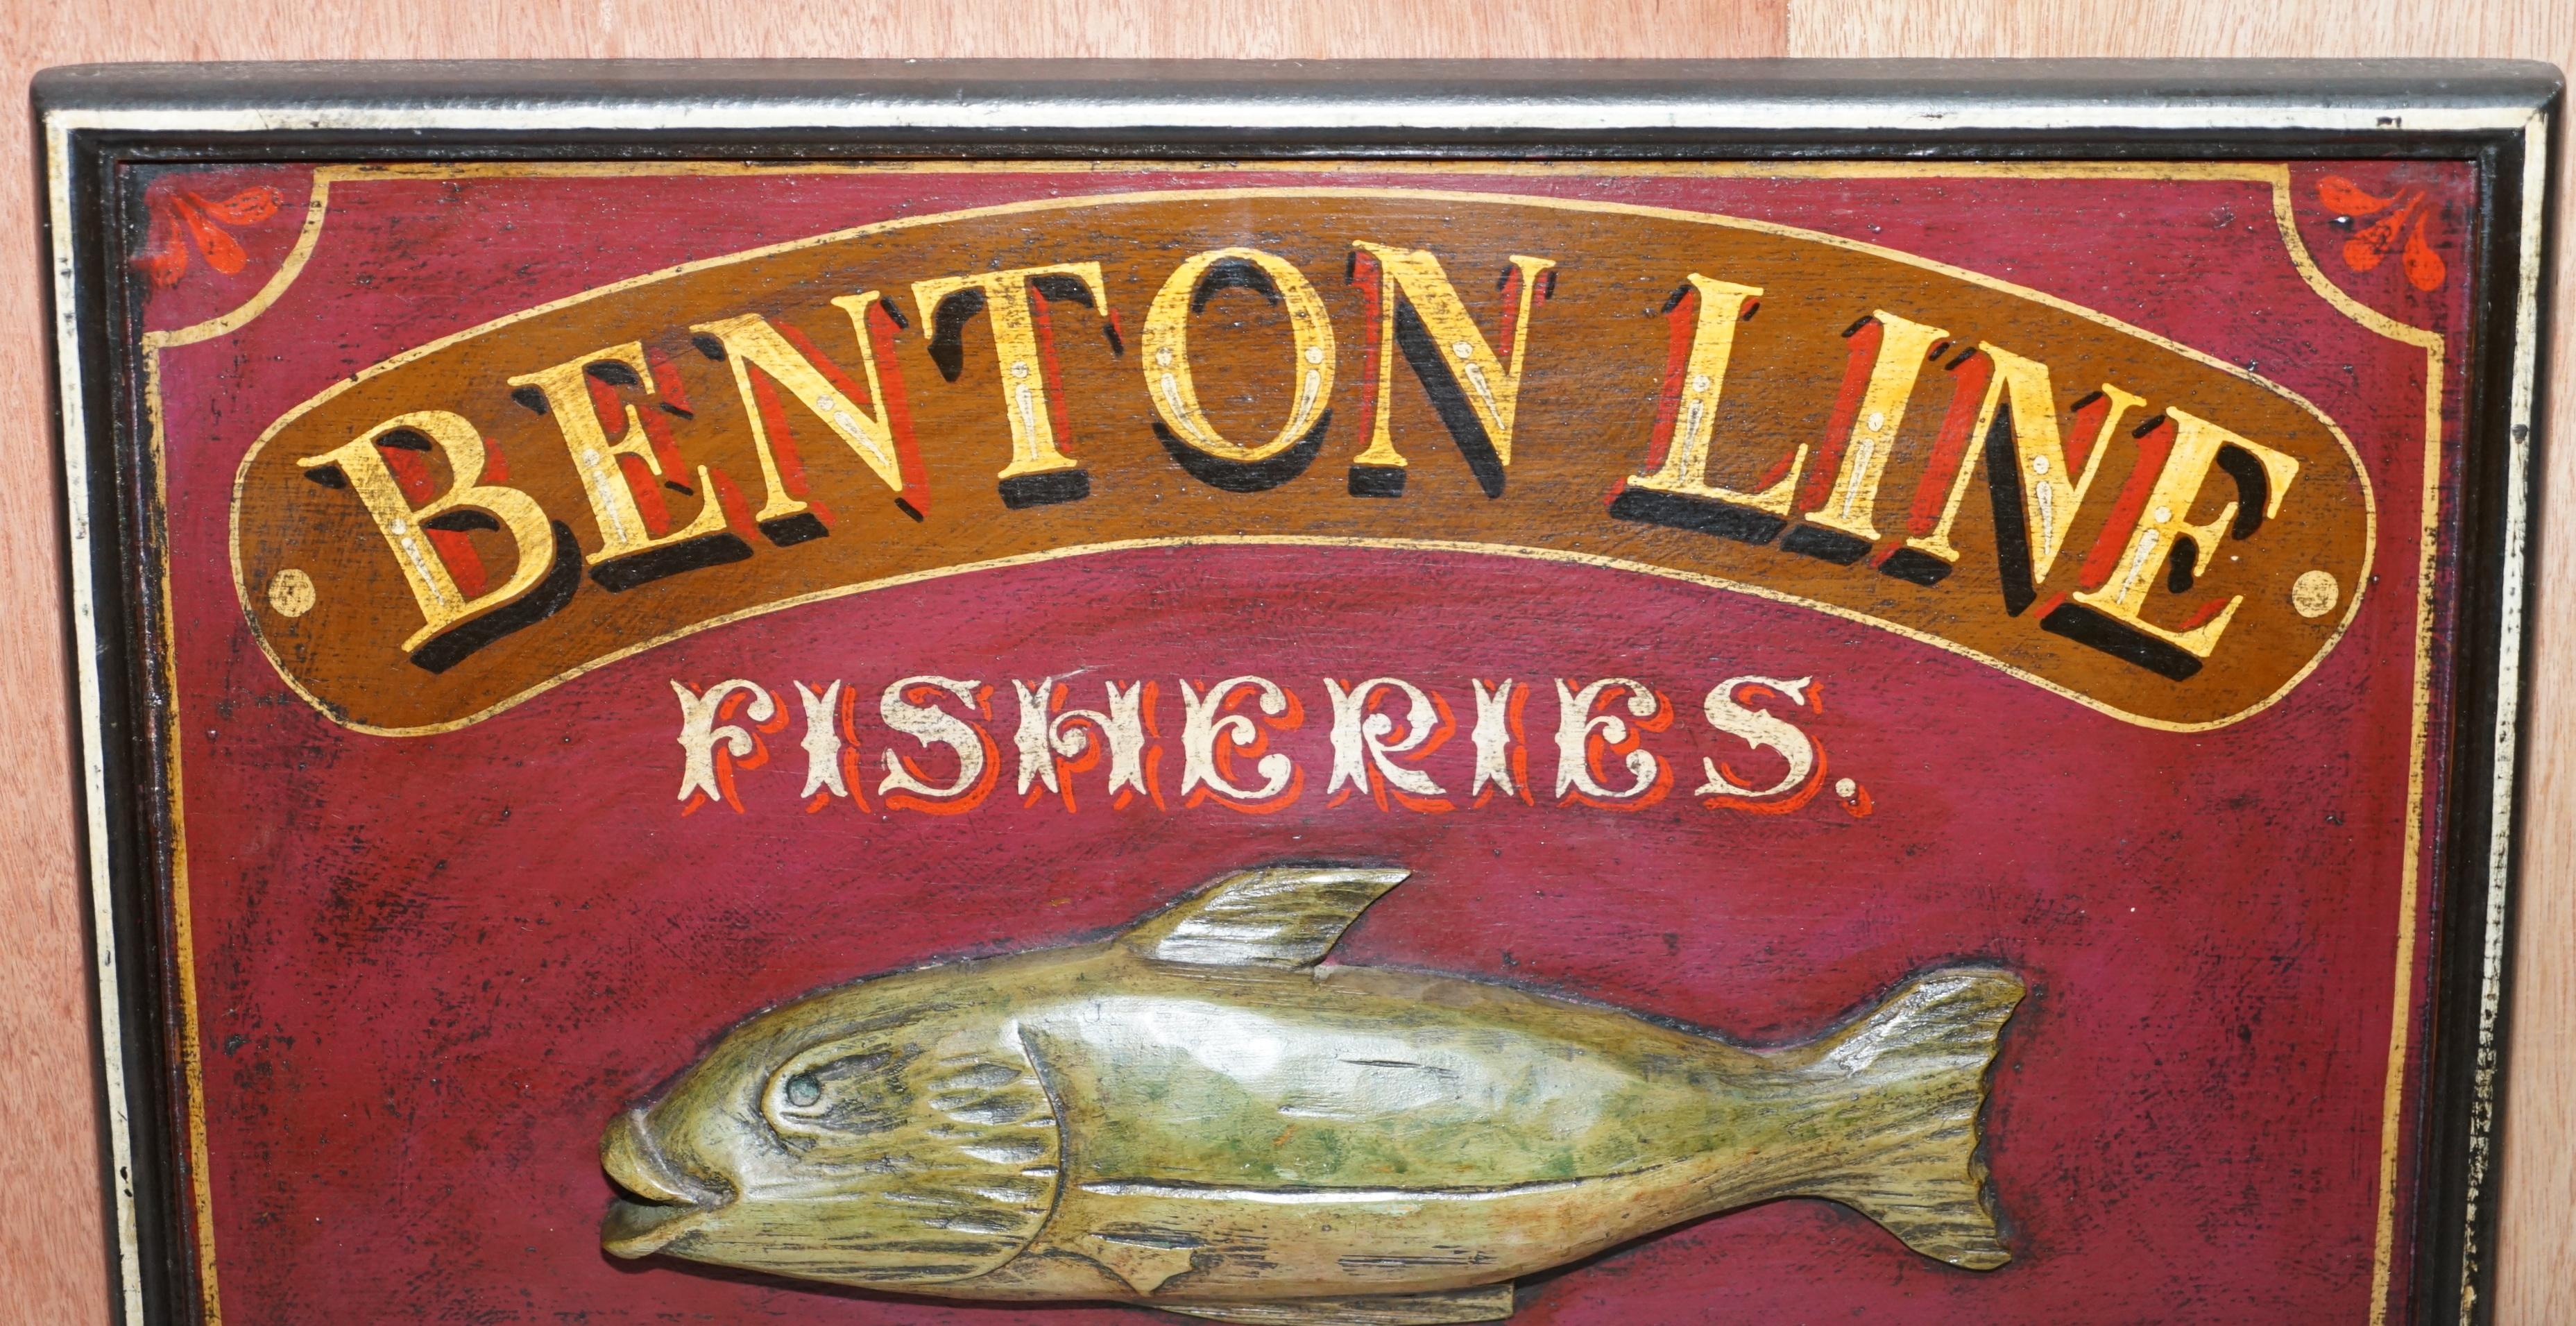 We are delighted to offer for sale this lovely vintage style hand painted Benton Fishers advertising sign

A good looking well made and decorative sign. It looks new to me but with a vintage style of hand painting

Dimensions

Height